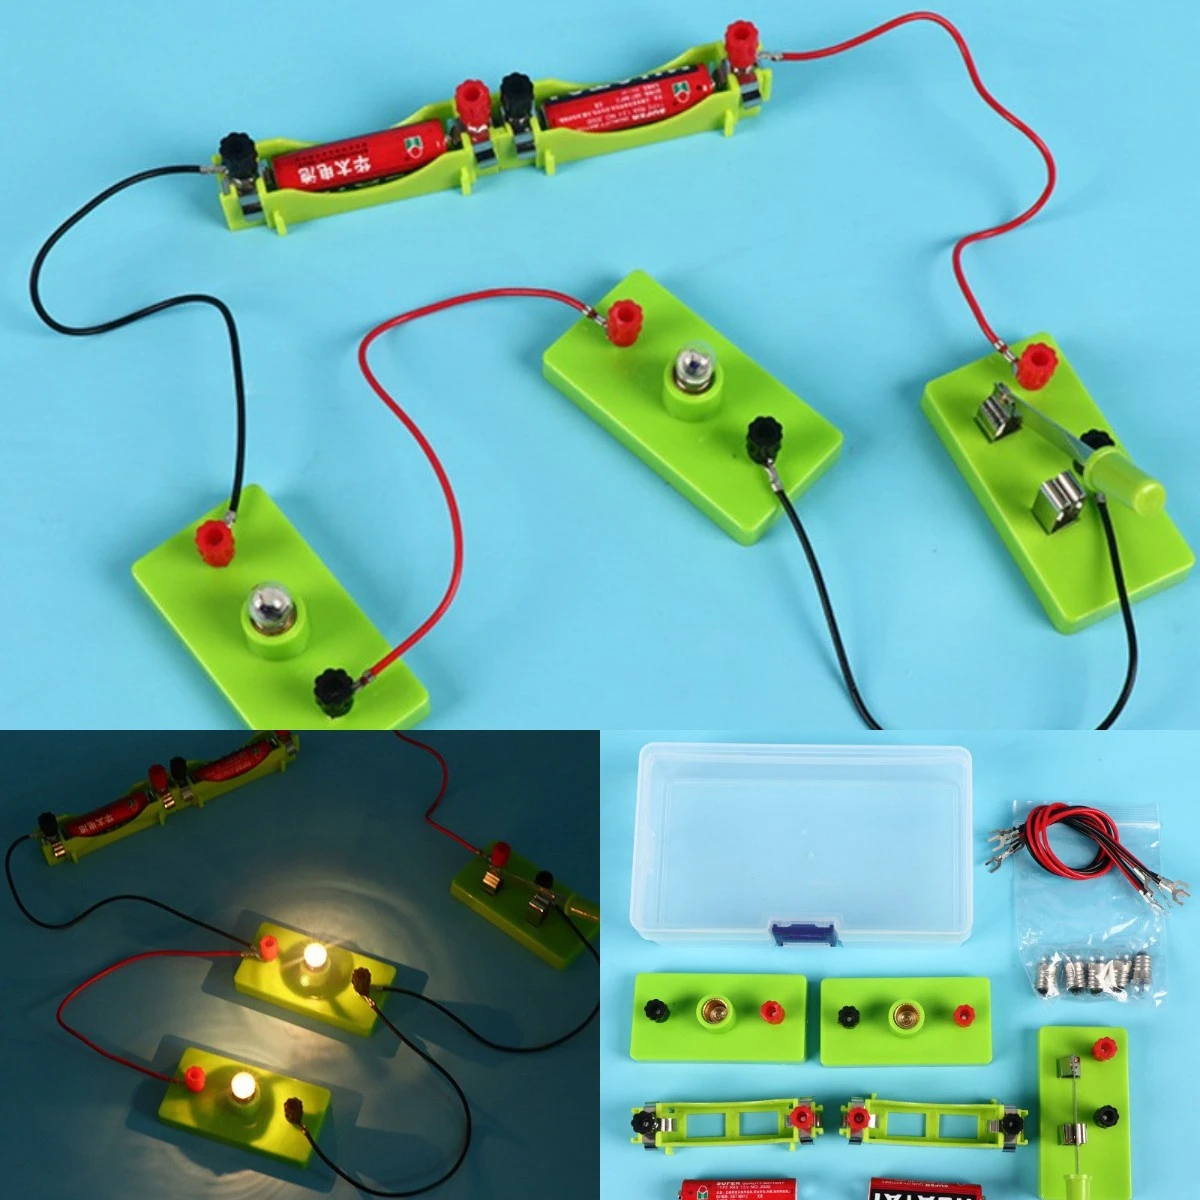 

Kids Science Toy Basic Circuit Electricity Learning Physics Educational Toys For Children STEM Experiment Hands-On Ability Toys